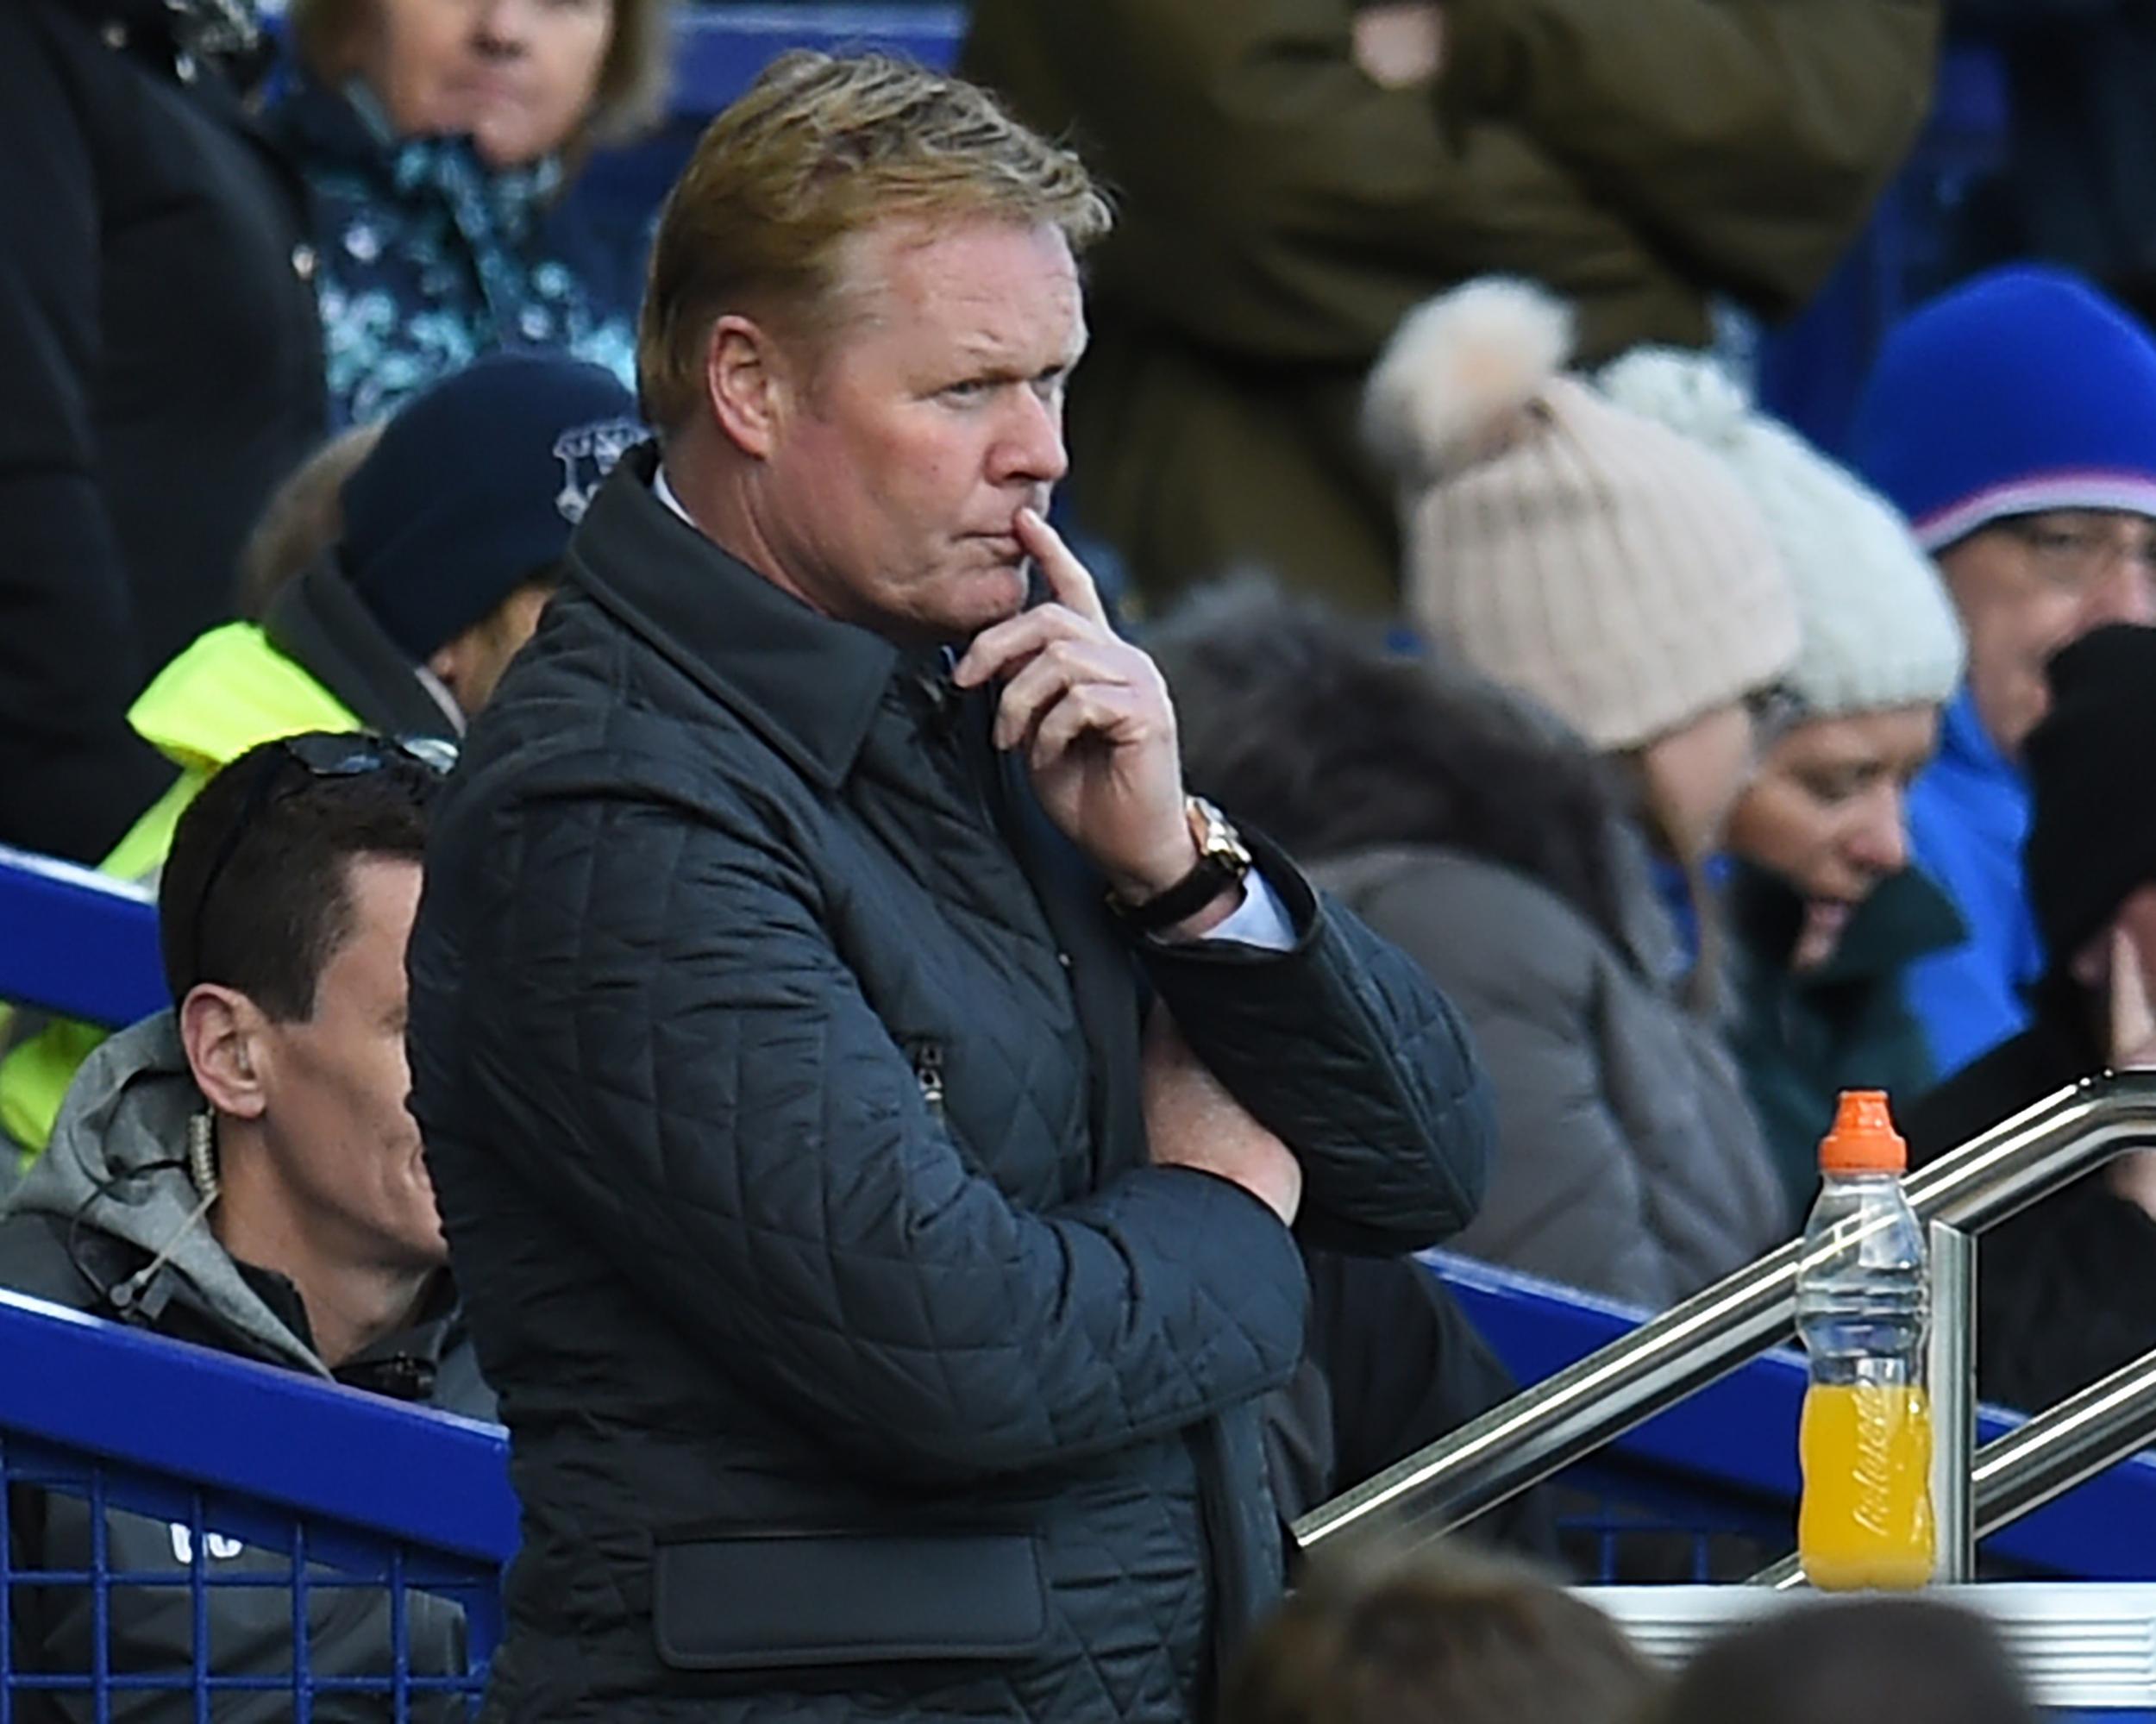 Koeman's Everton reign has come to an end after little more than one year